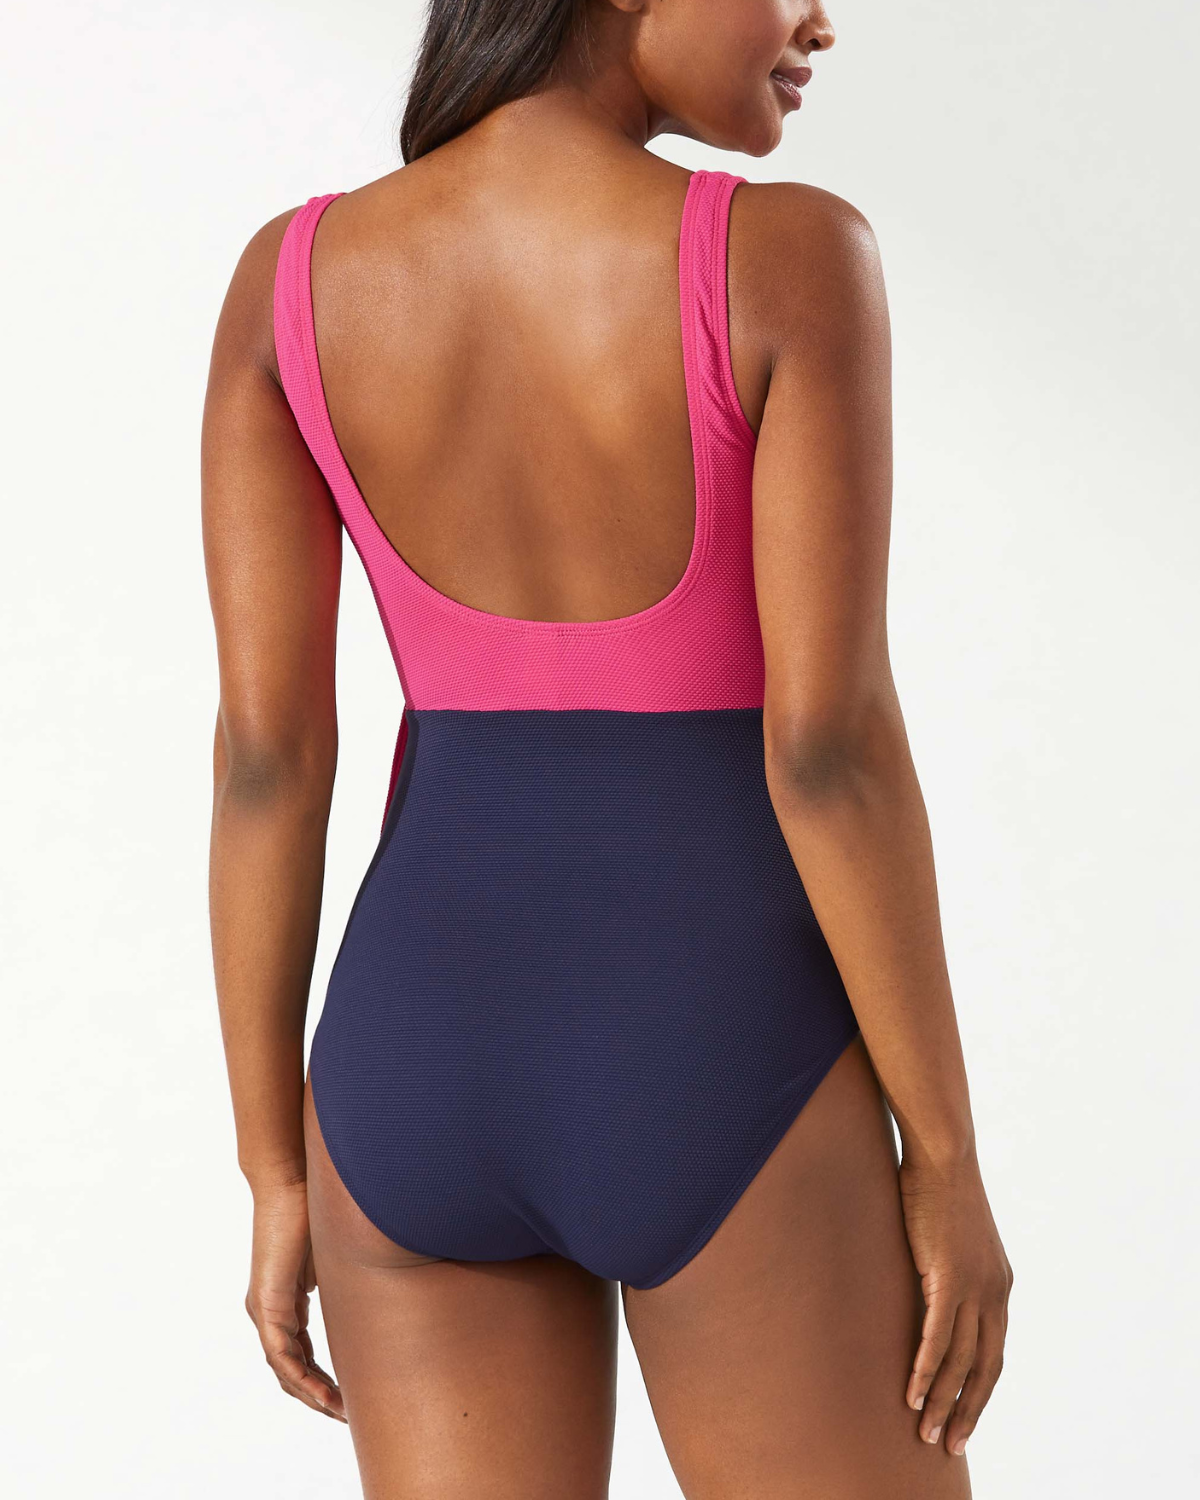 Model wearing a one piece wrap swimsuit in a colorblock print in navy, pink and red